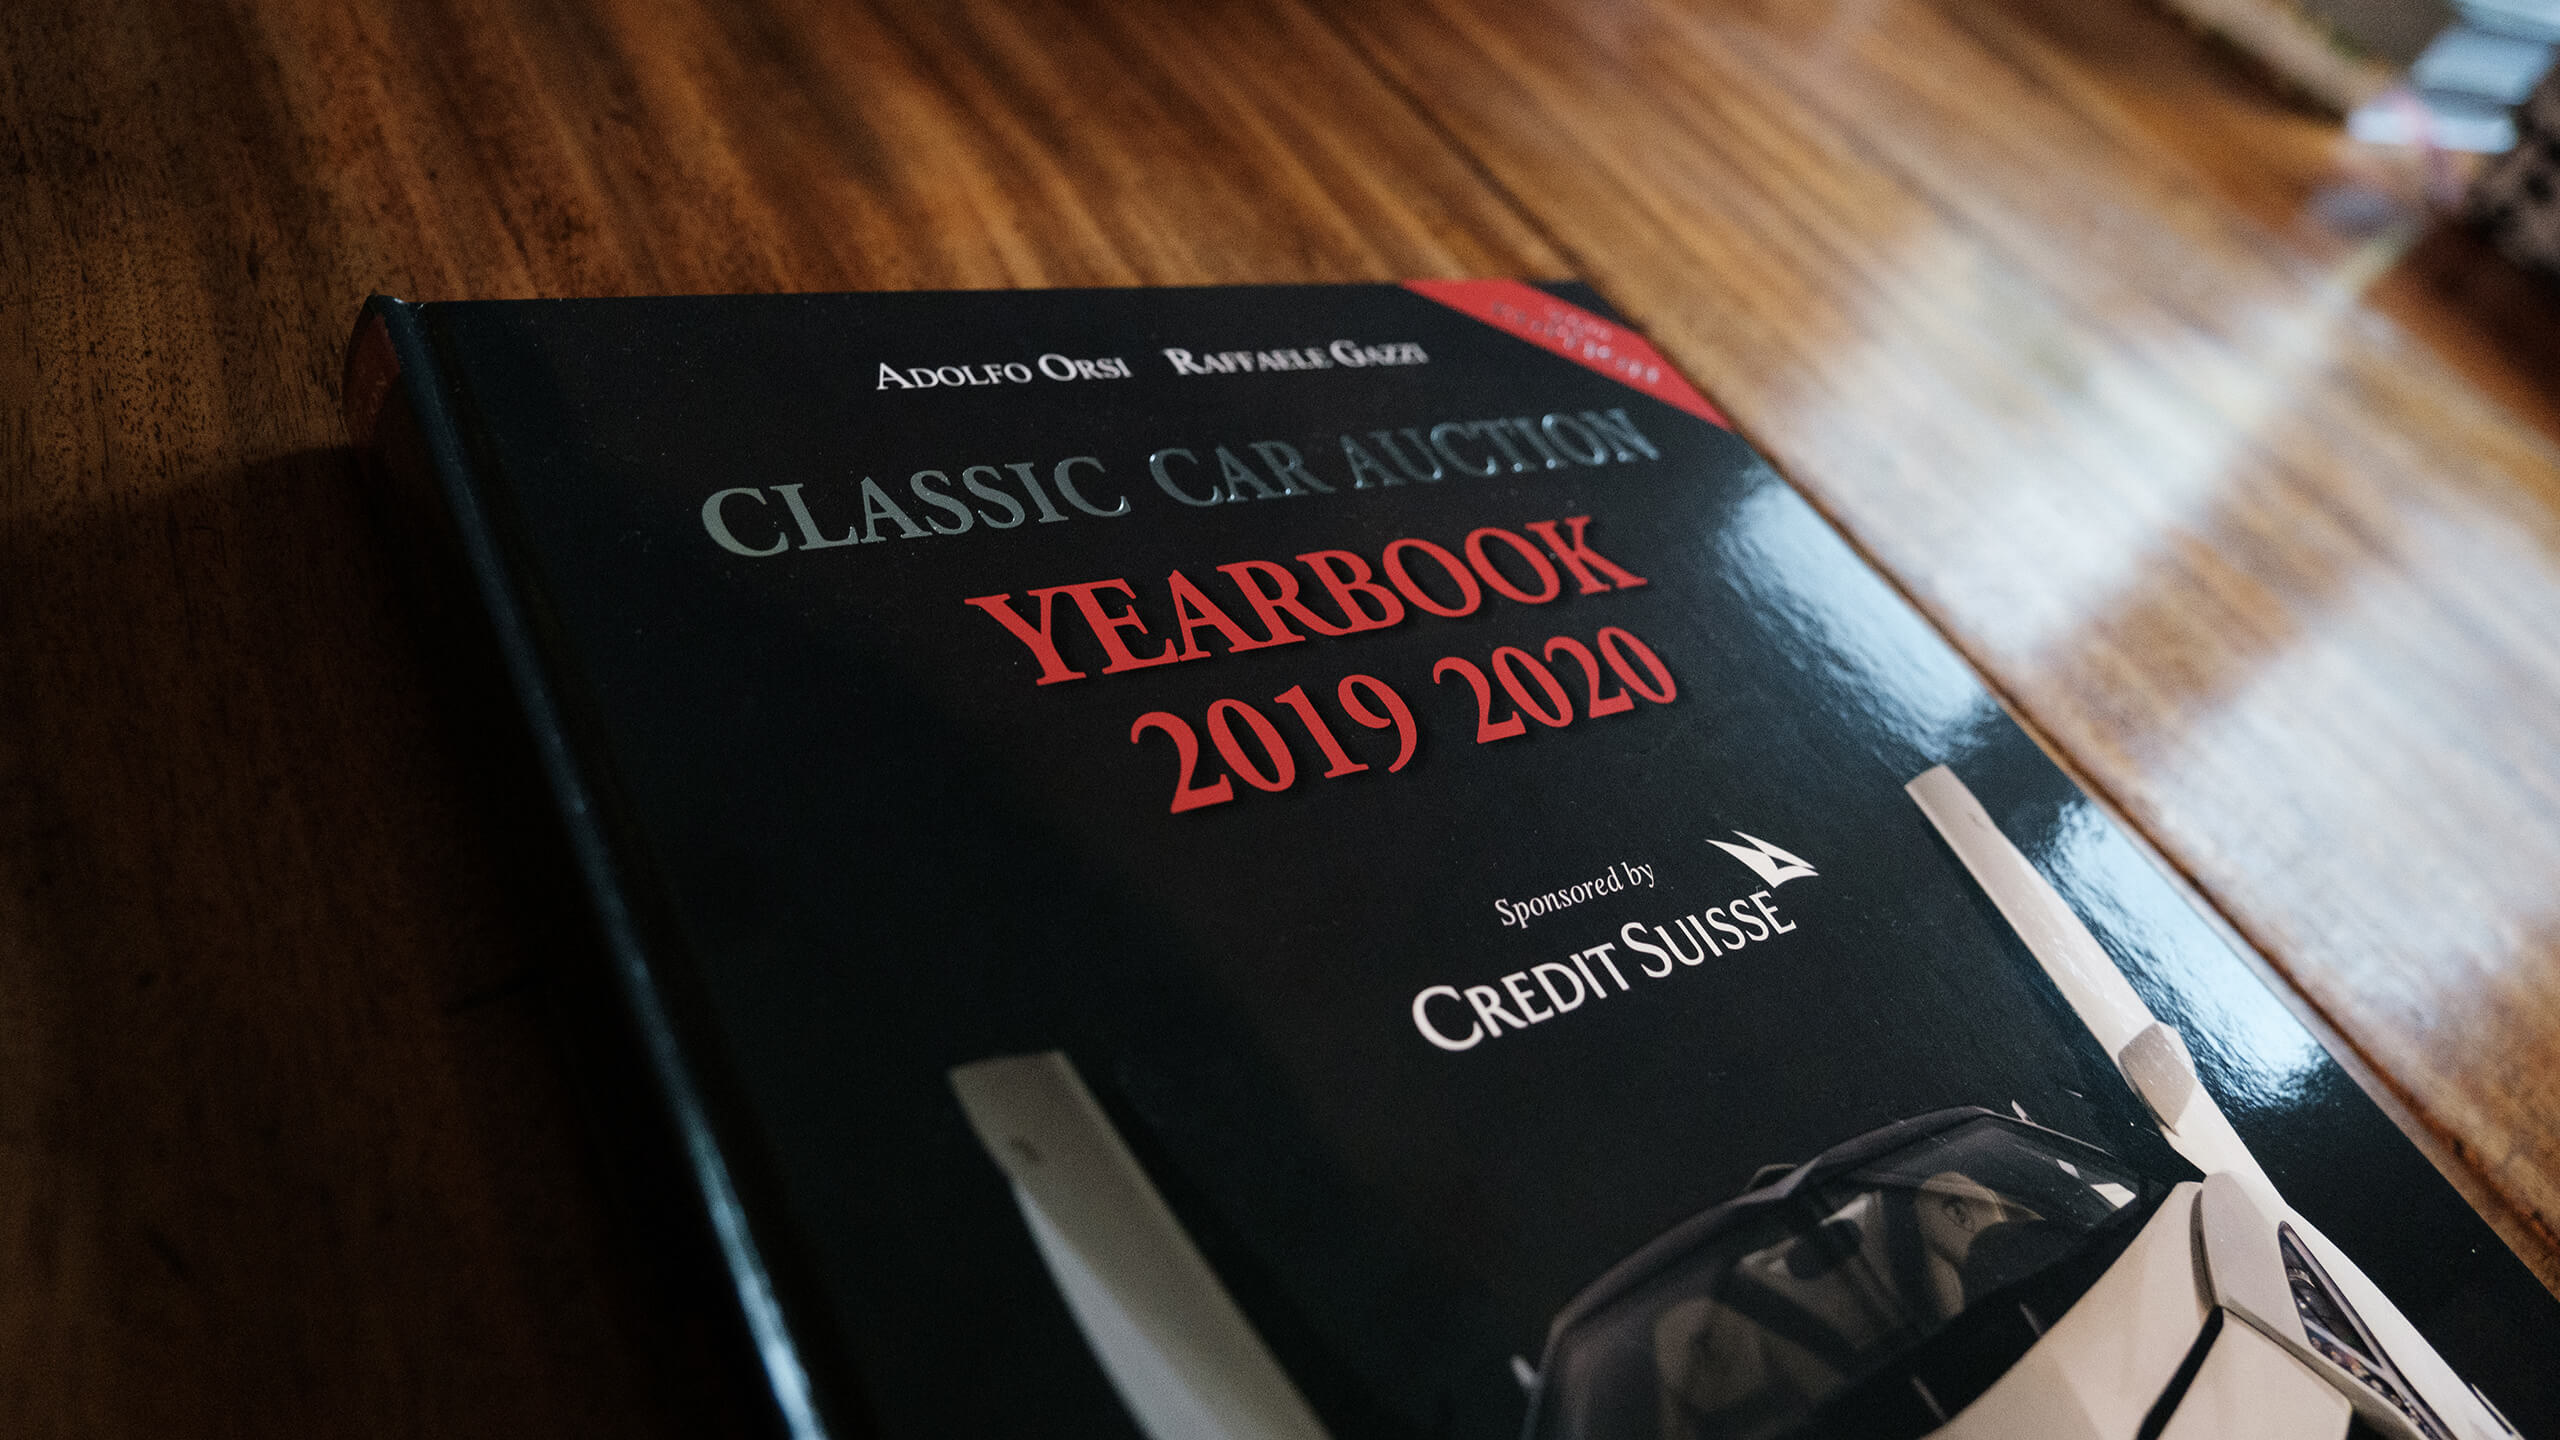 A year of two halves… Classic Car Auction Yearbook 2019-2020